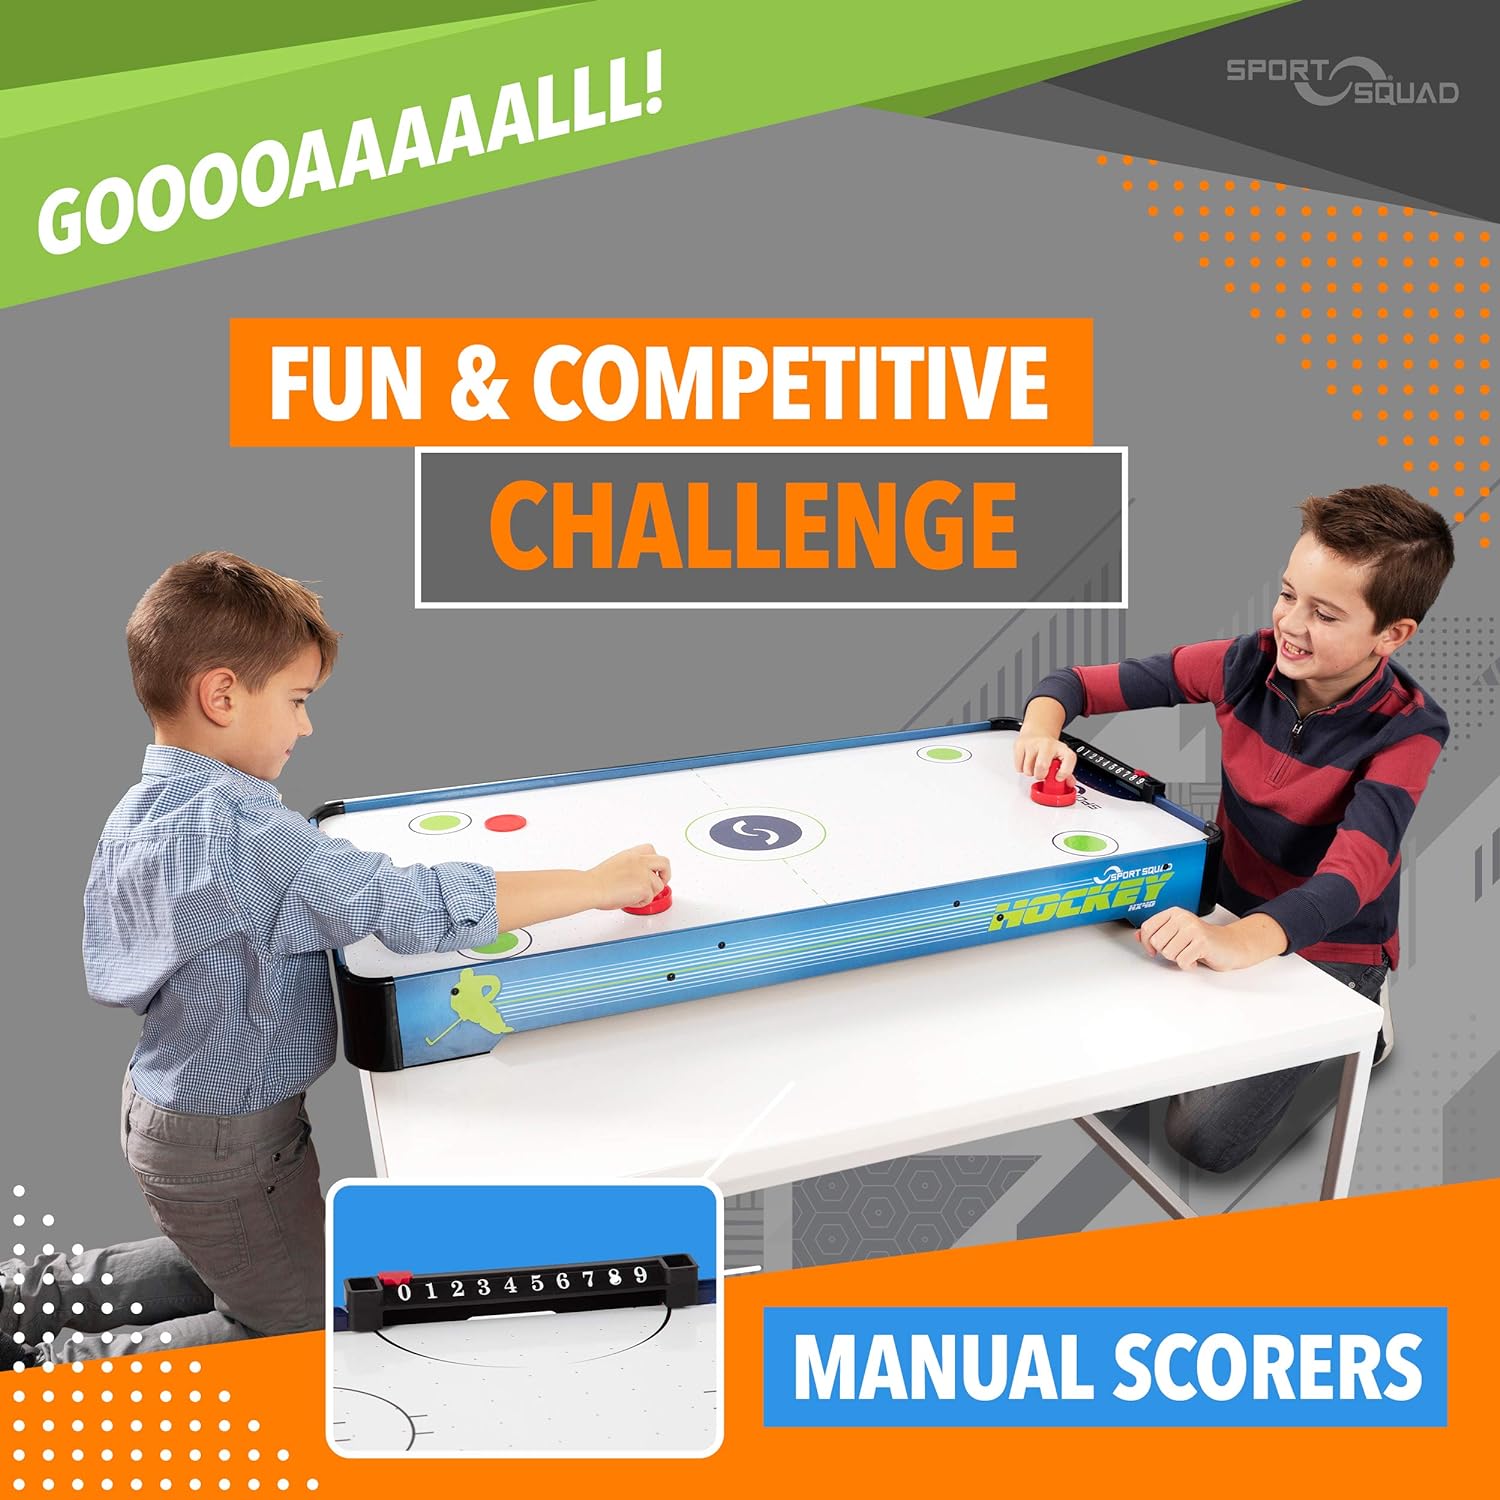 Kids playing on Sport Squad HX40 Electric Powered Air Hockey Table